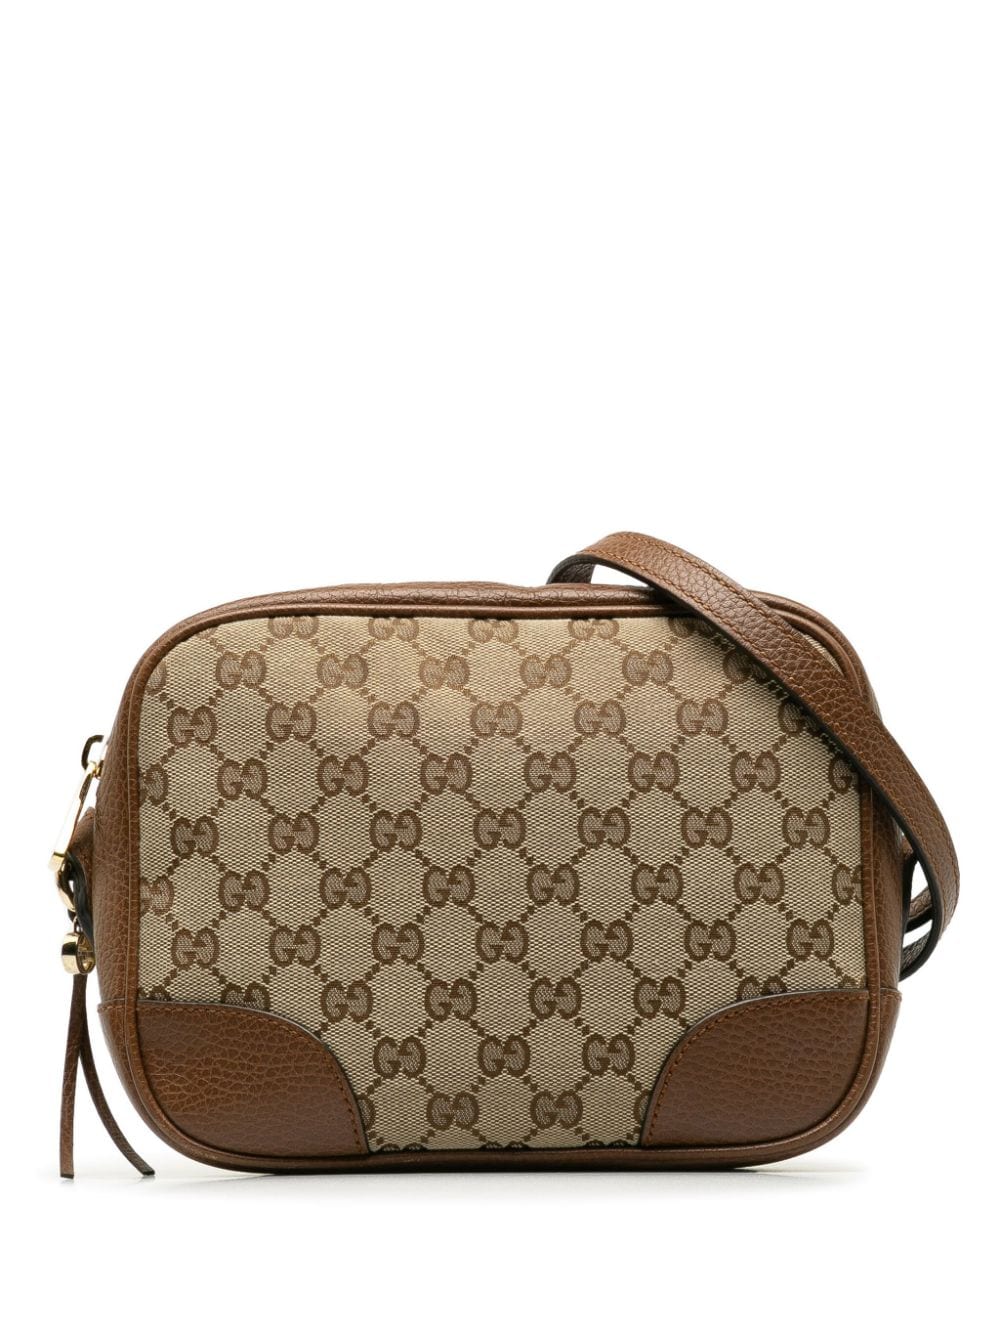 Pre-owned Gucci 2010-2015 Gg Canvas Shoulder Bag In 褐色